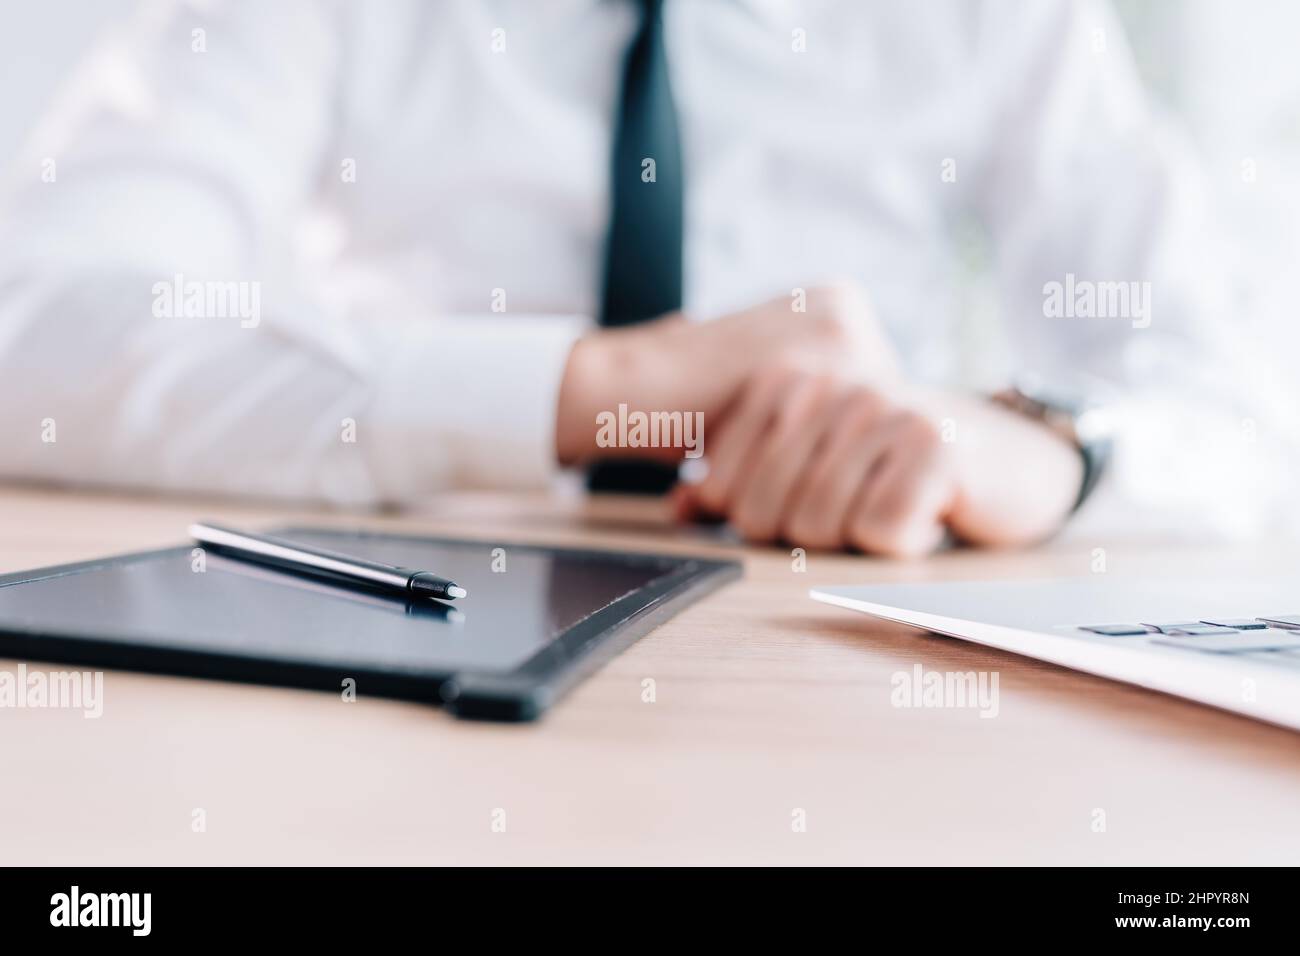 E-signature stylus and pad on business office desk, hands of a businessman in background, selective focus Stock Photo